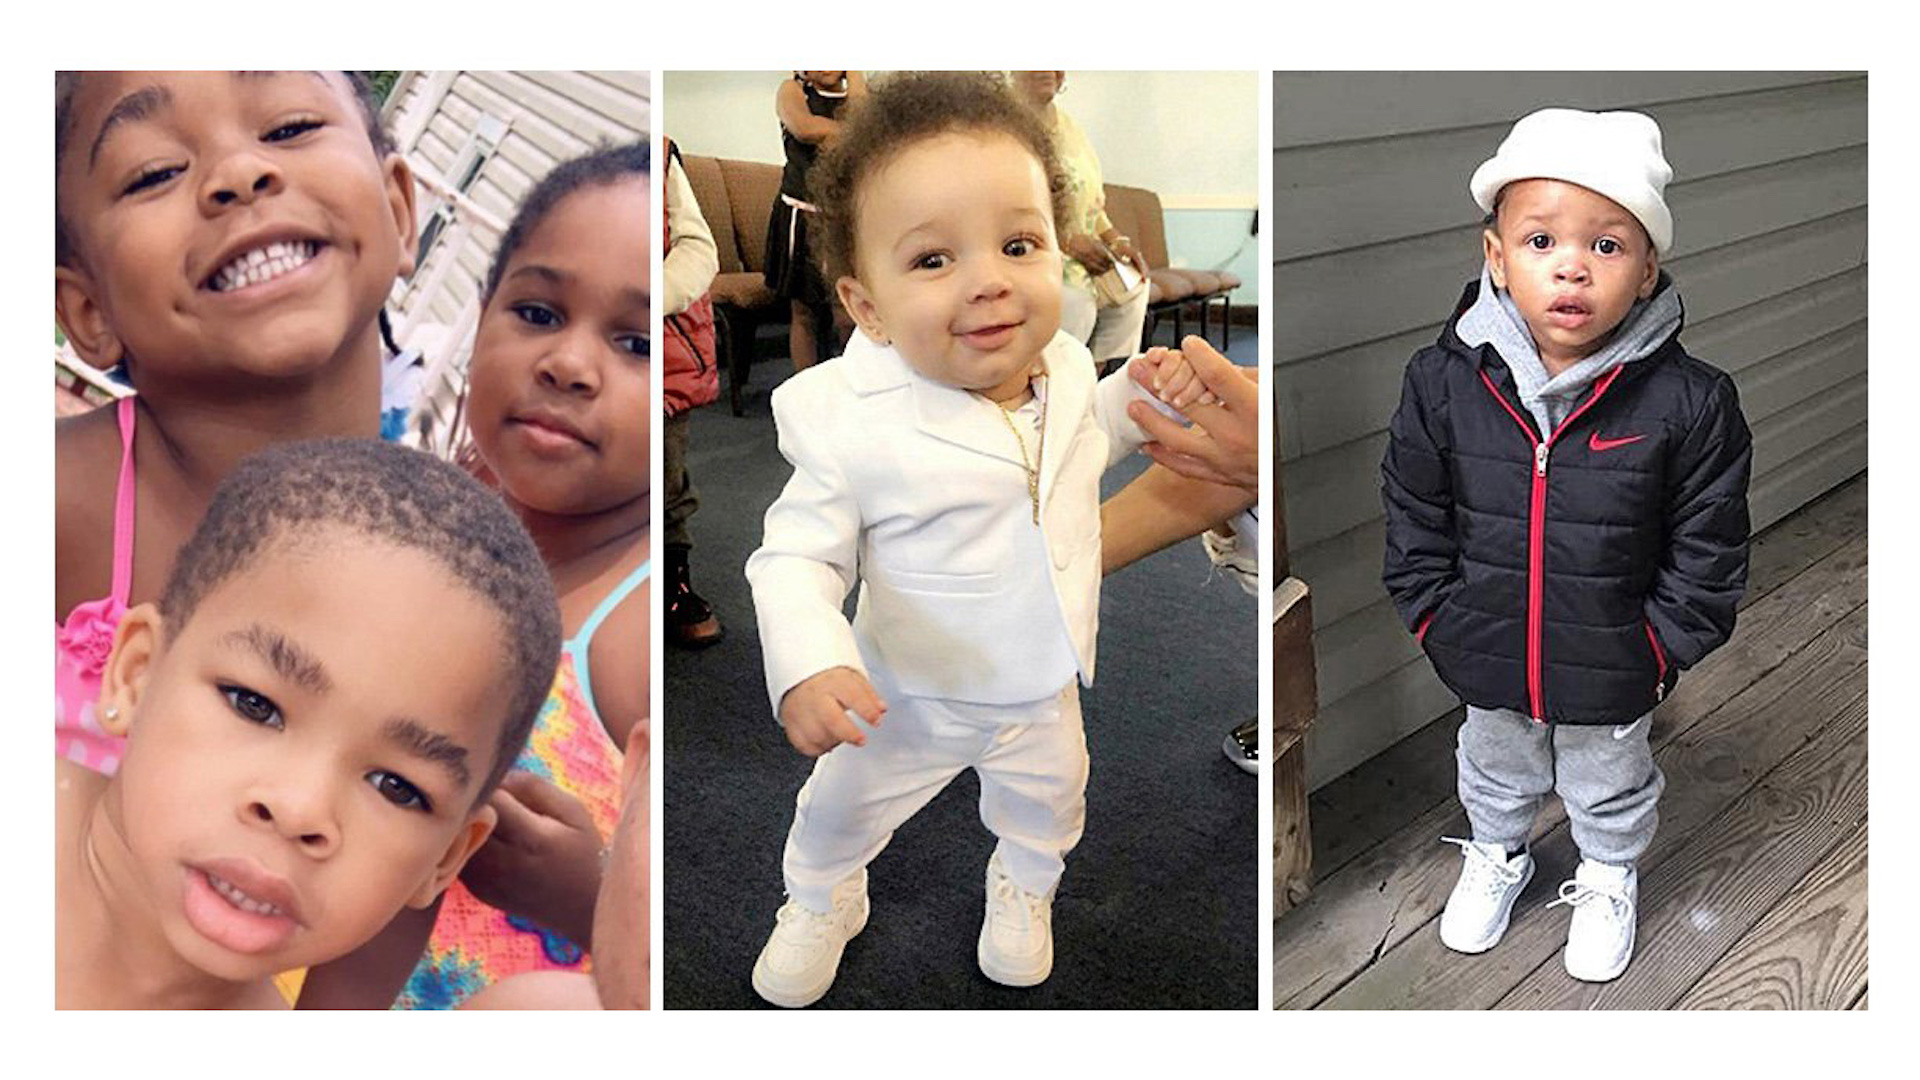 These are contributed photos of, from left: Ava Jones, 4; Luther Jones Jr., 6; La'Myhia Jones, 8; Jaydan Augustyniak, nine months; and Dalvin Pacley, 2. The three Jones siblings, their half-sibling, Augustyniak, and Pacley were all killed in a fatal fire at 1248 W. 11th St., in Erie, on Aug. 11, 2019. The photo at left was taken in late July 2019. The photo at center was taken in late May 2019. The photo at right is undated.